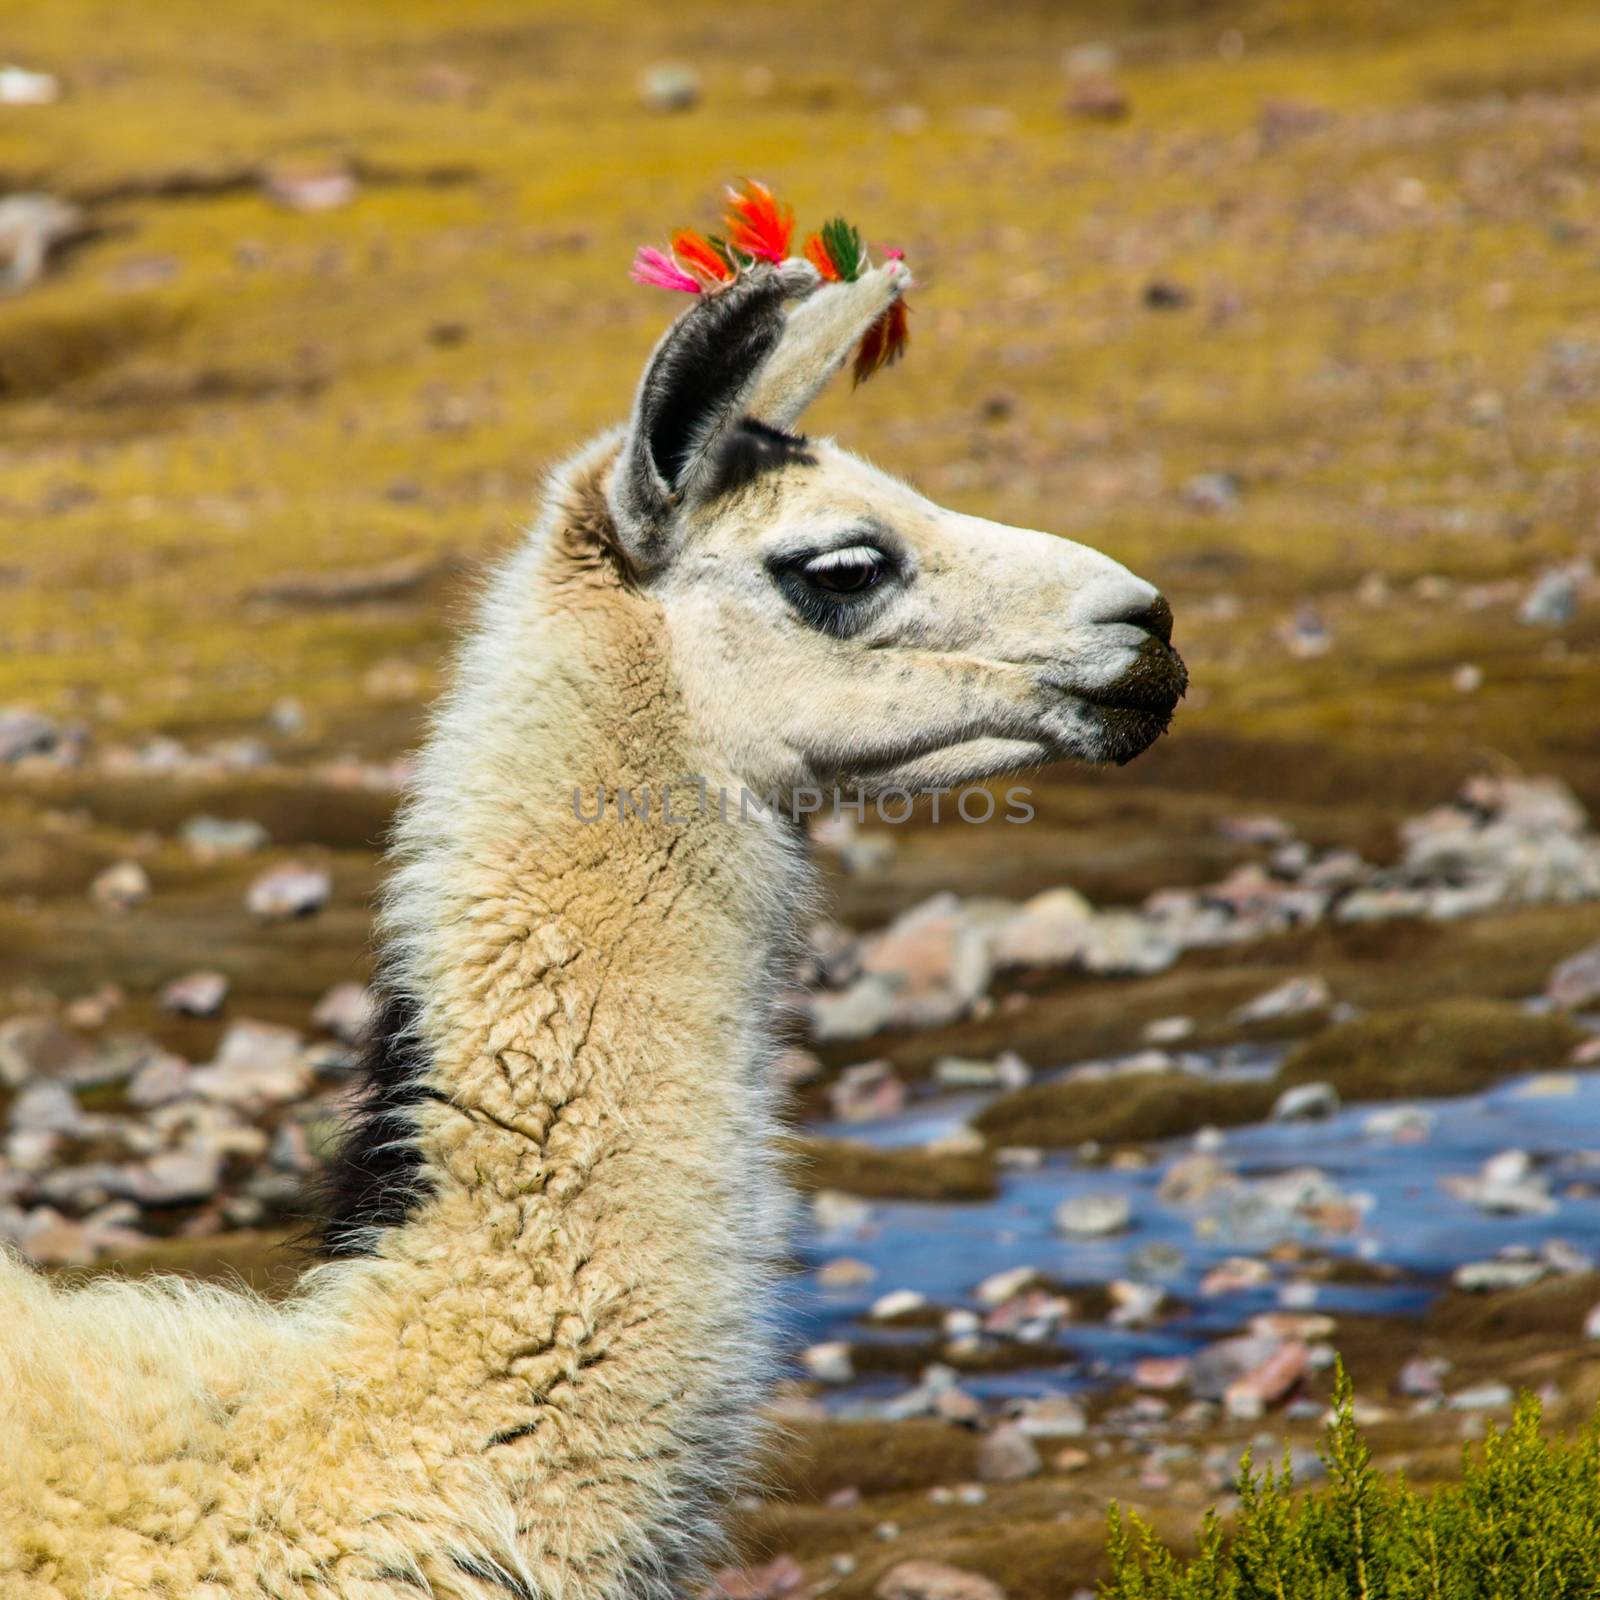 White llama with red ear tassels from right side